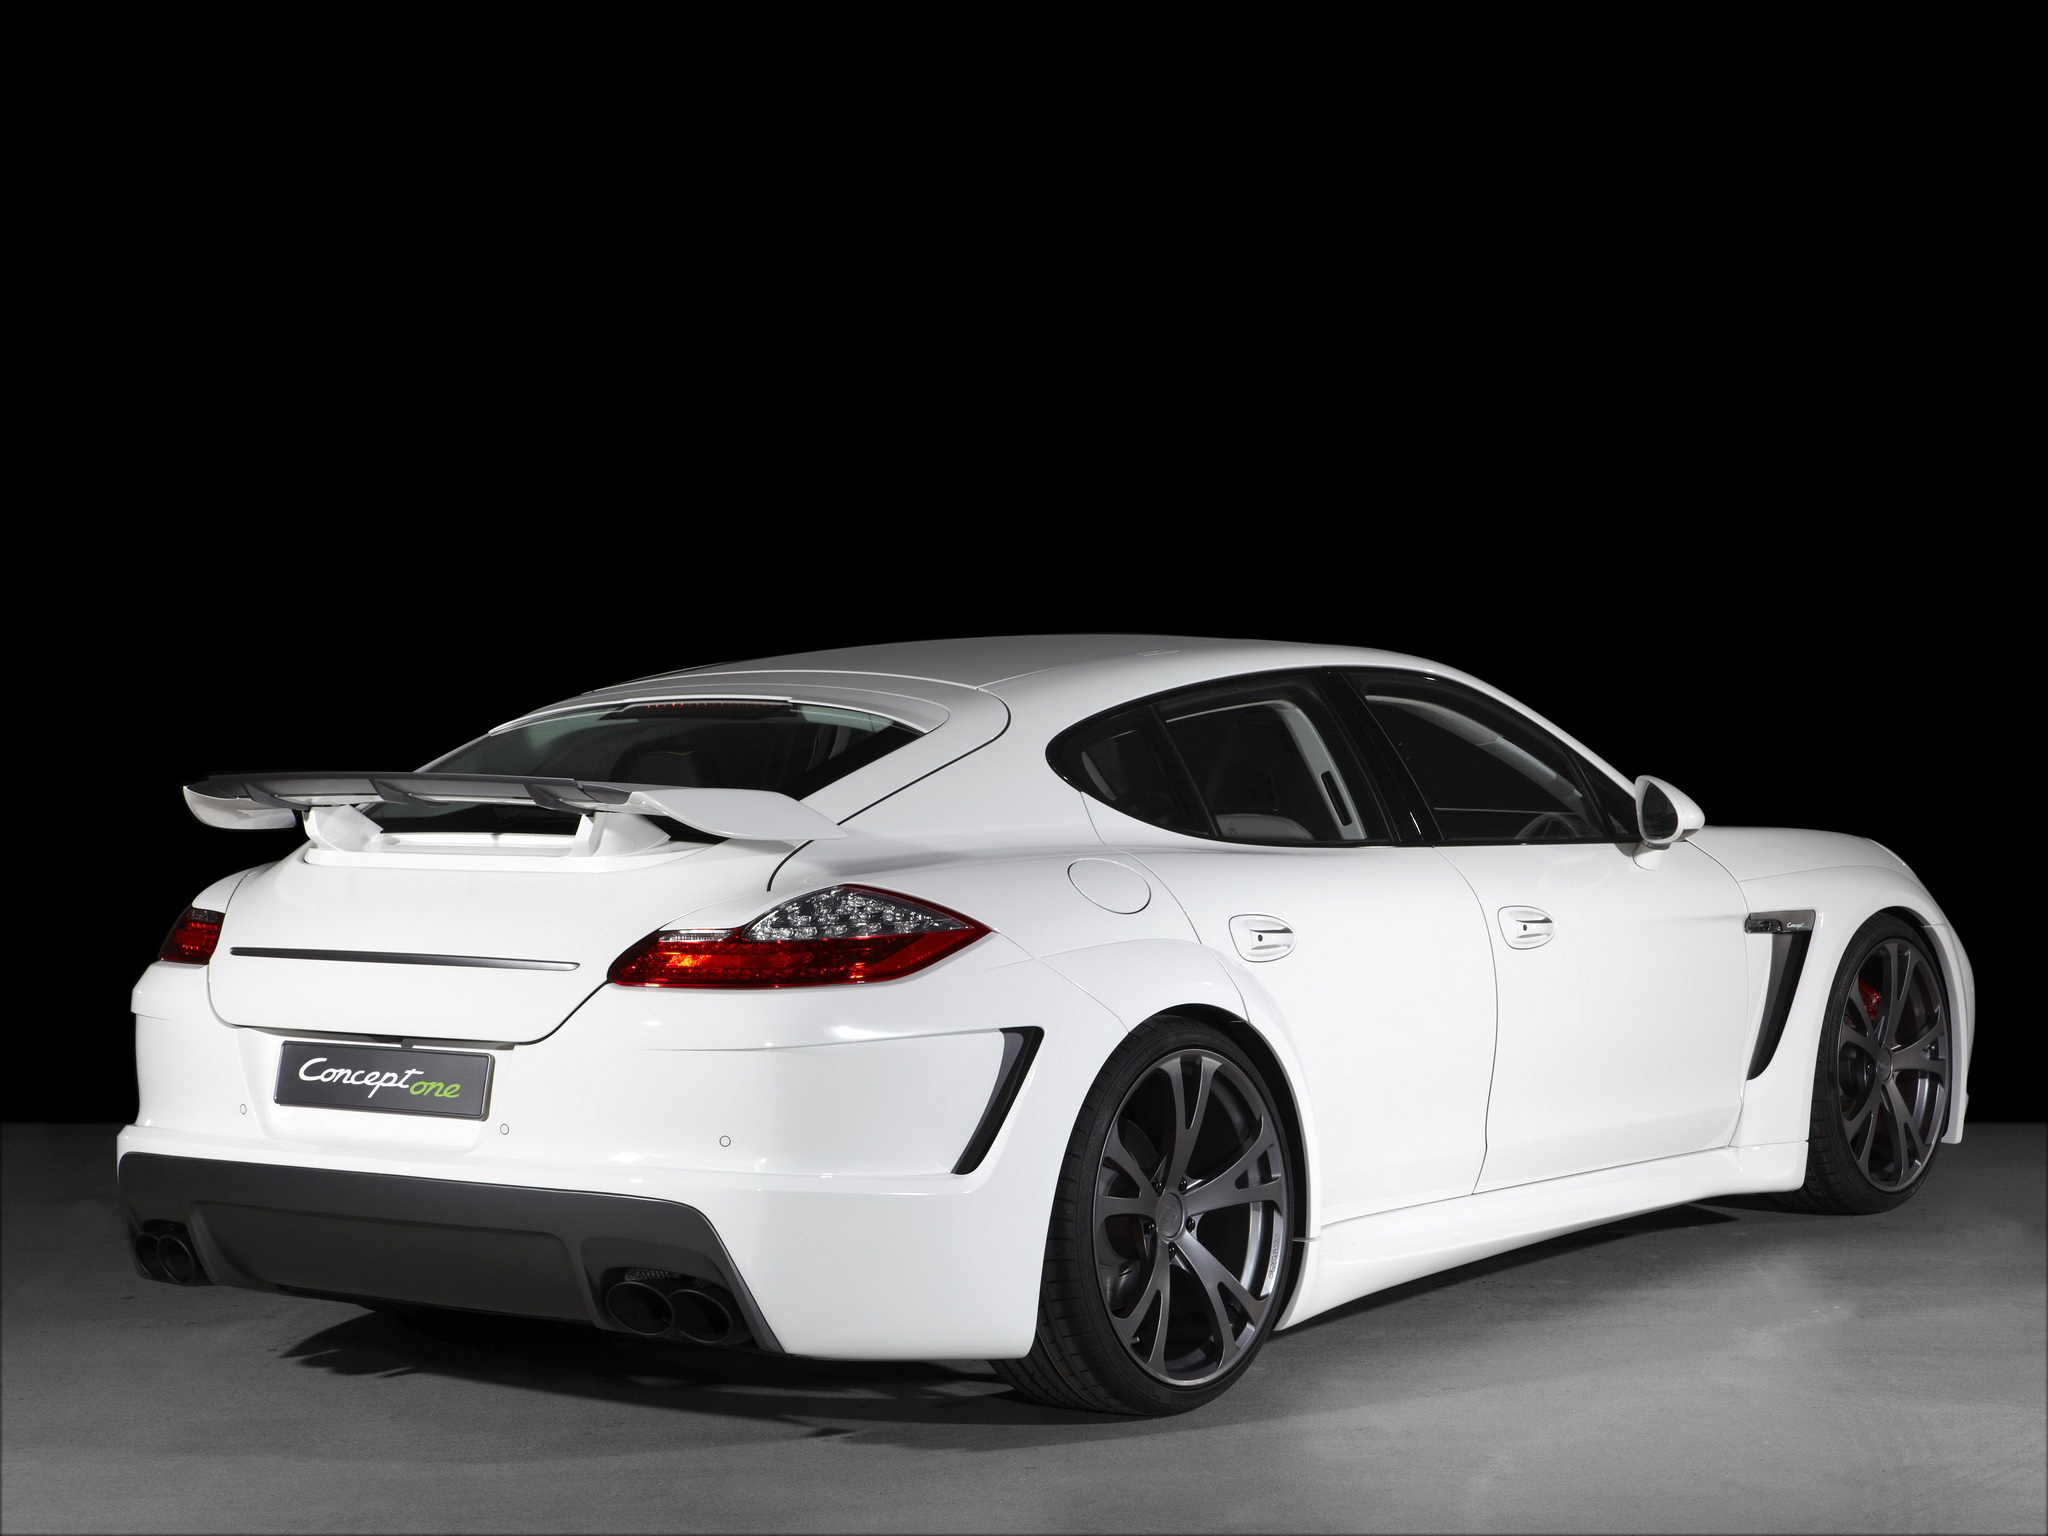 Download full size Concept one white angle Porshe wallpaper / 2048x1536